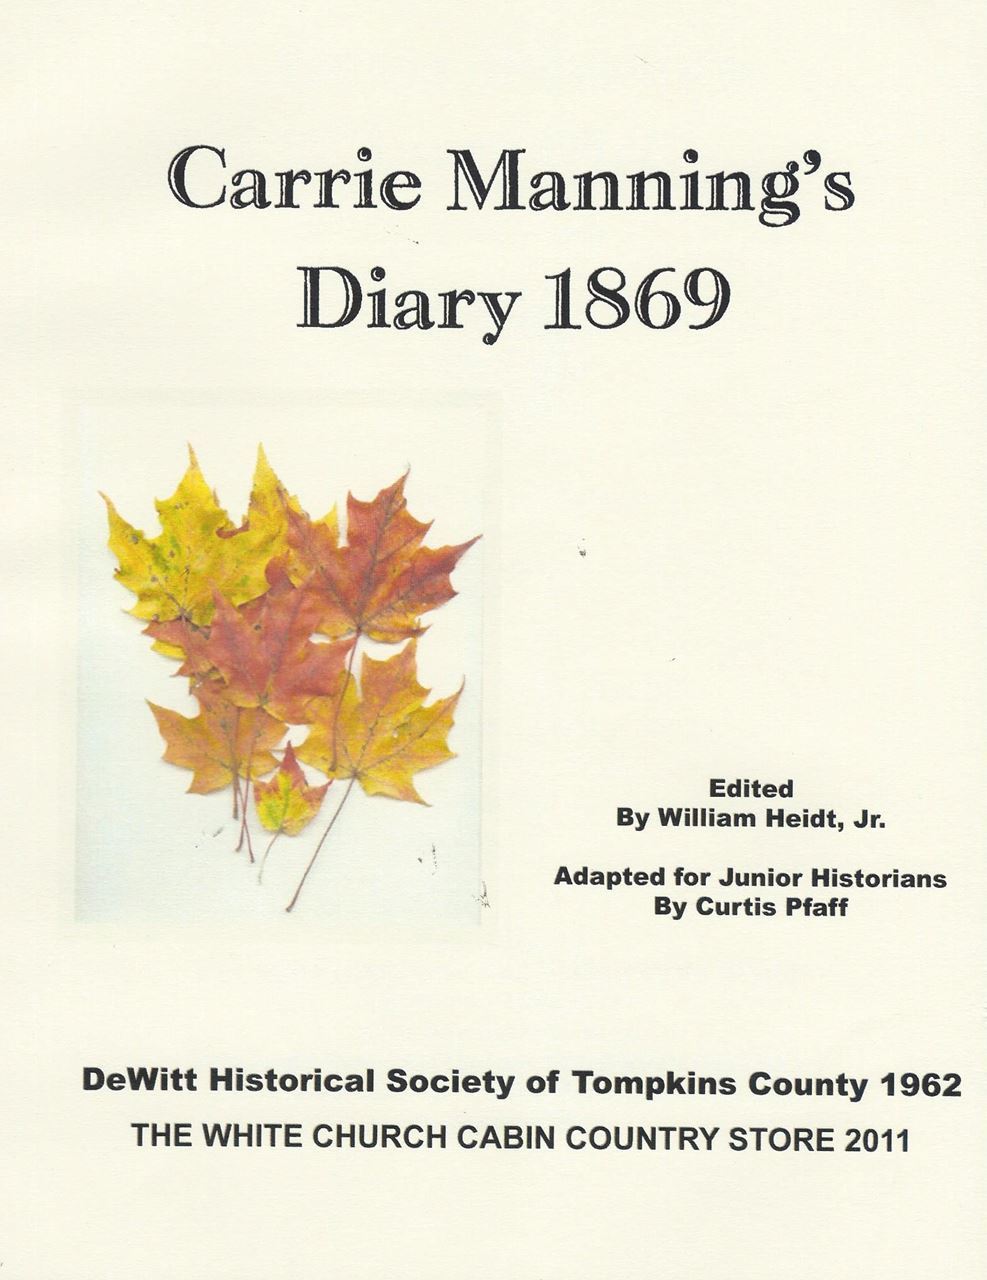 A picture of the cover of Carrie Manning's Diary 1869, with an image of fall leaved in the middle. Next to the leaves the text reads "Carrie Manning's Diary 1869 Edited By William Heidt, Jr. Adapted for Junior Historians By Curtis Pfaff" Below that it says "DeWitt Historical Society of Tompkins County 1962 THE WHITE CHURCH CABIN COUNTRY STORE 2011" 